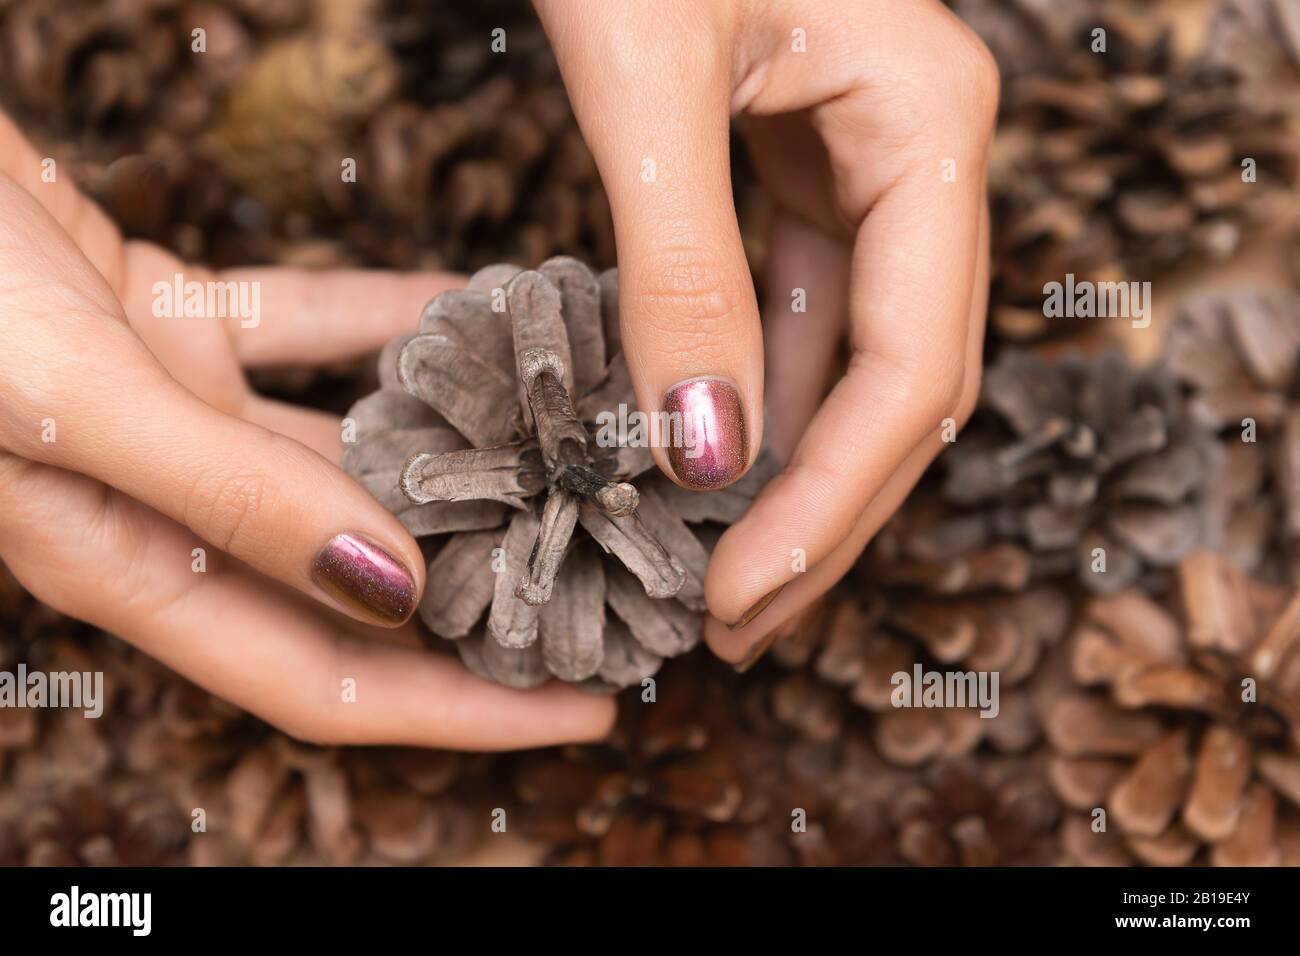 Female hand with brown glitter nail design holding pane cone. Stock Photo